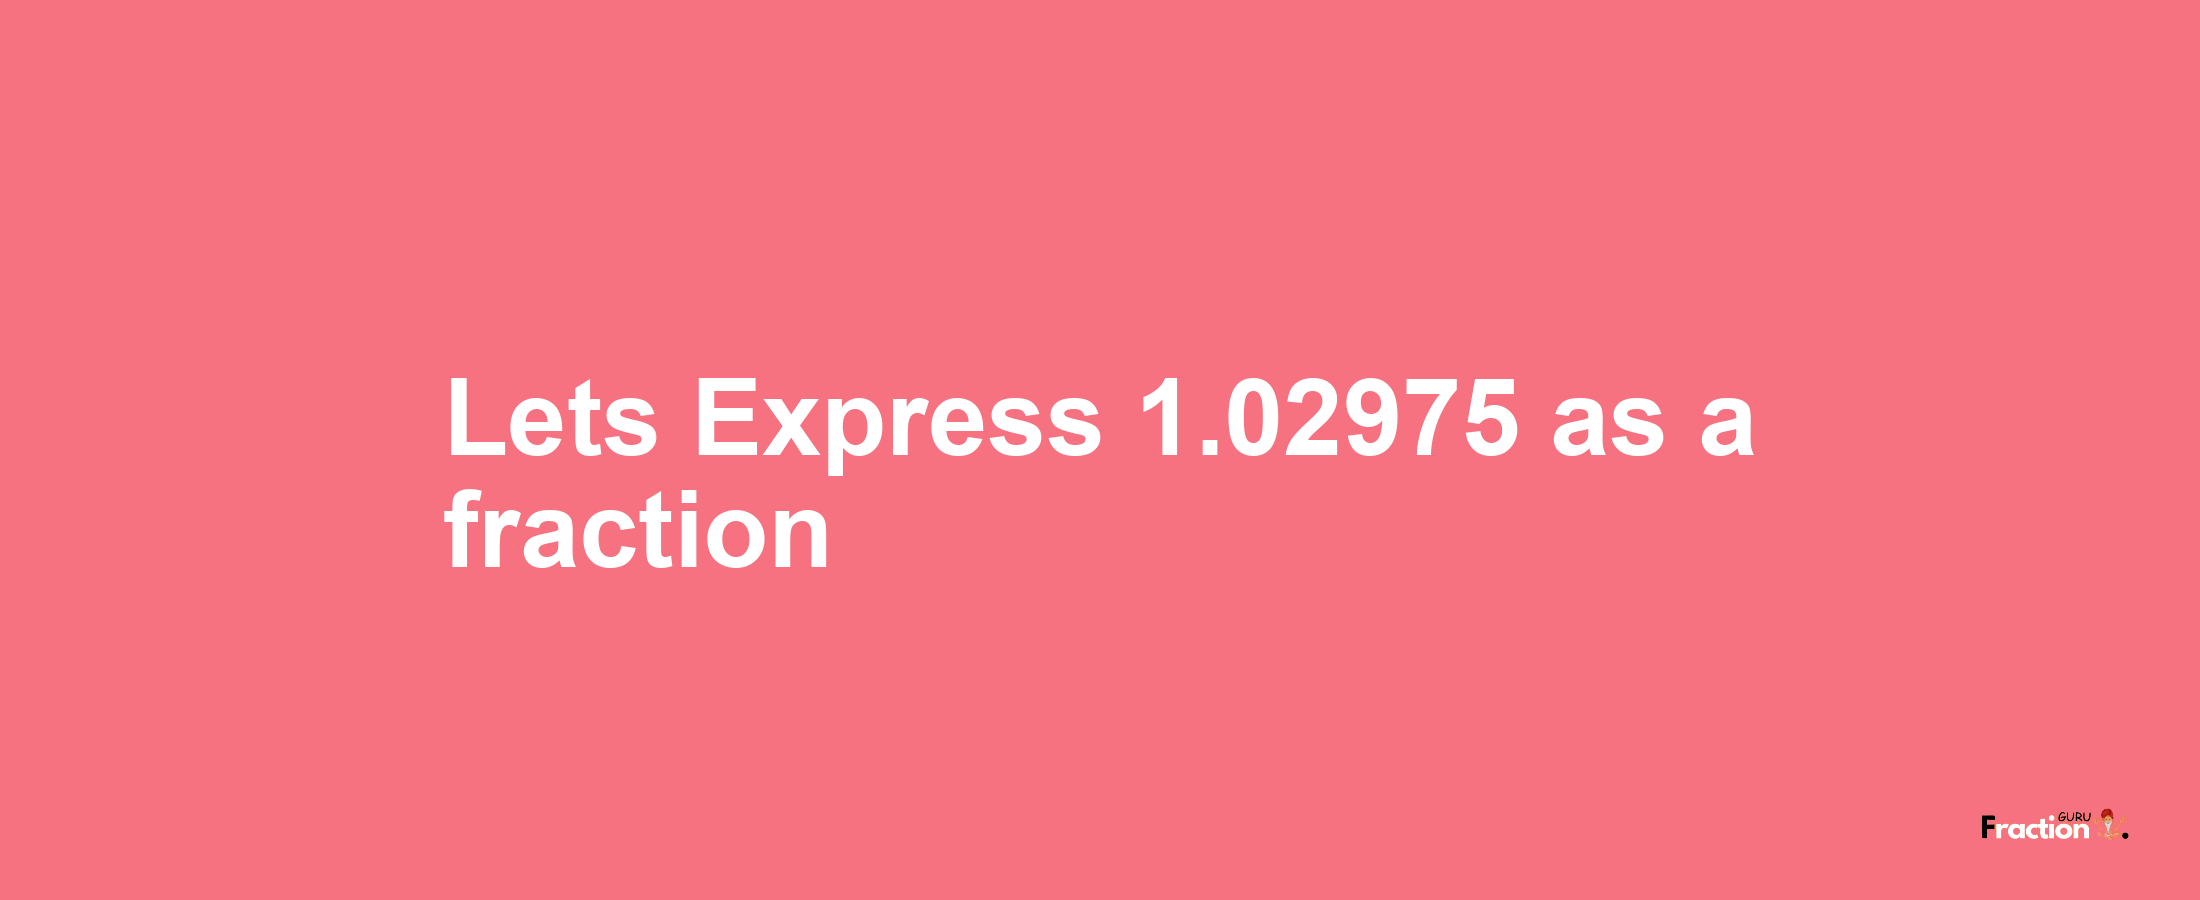 Lets Express 1.02975 as afraction